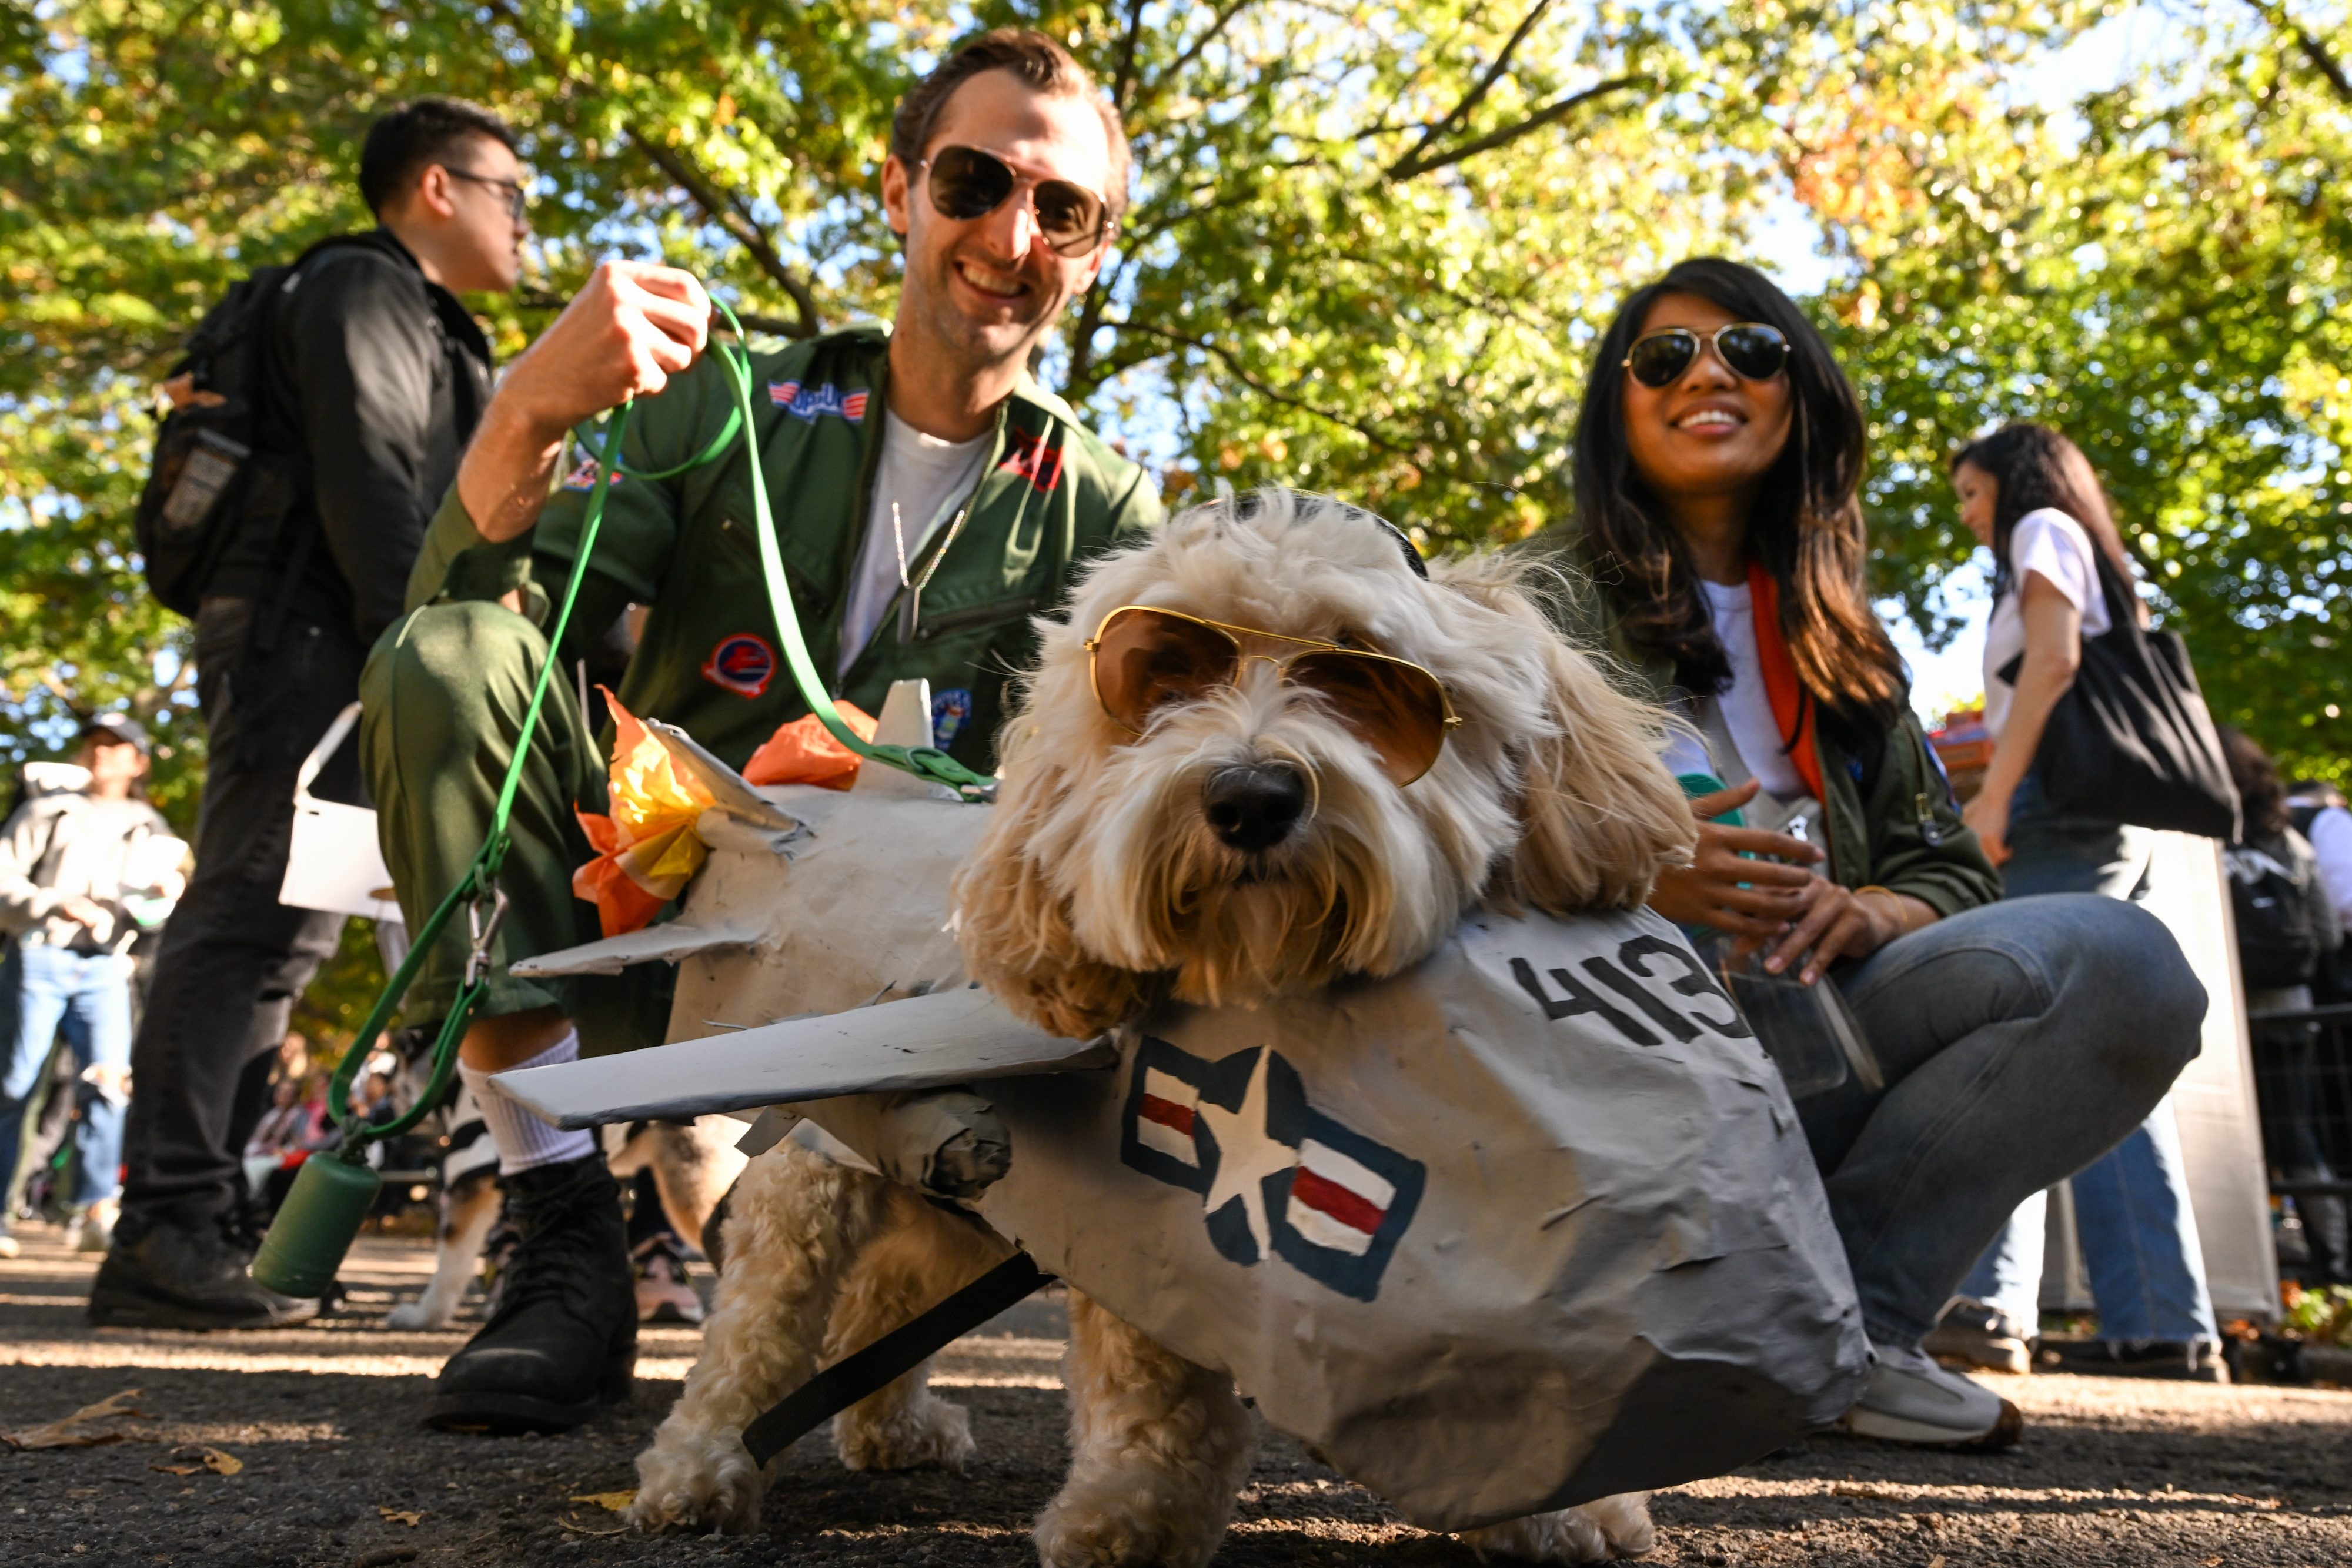 Aaron Reeves and Farah Azmi with their cockapoo, Theo, dressed as Top Gun: Maverick. (Photo by Alexi Rosenfeld/Getty Images)